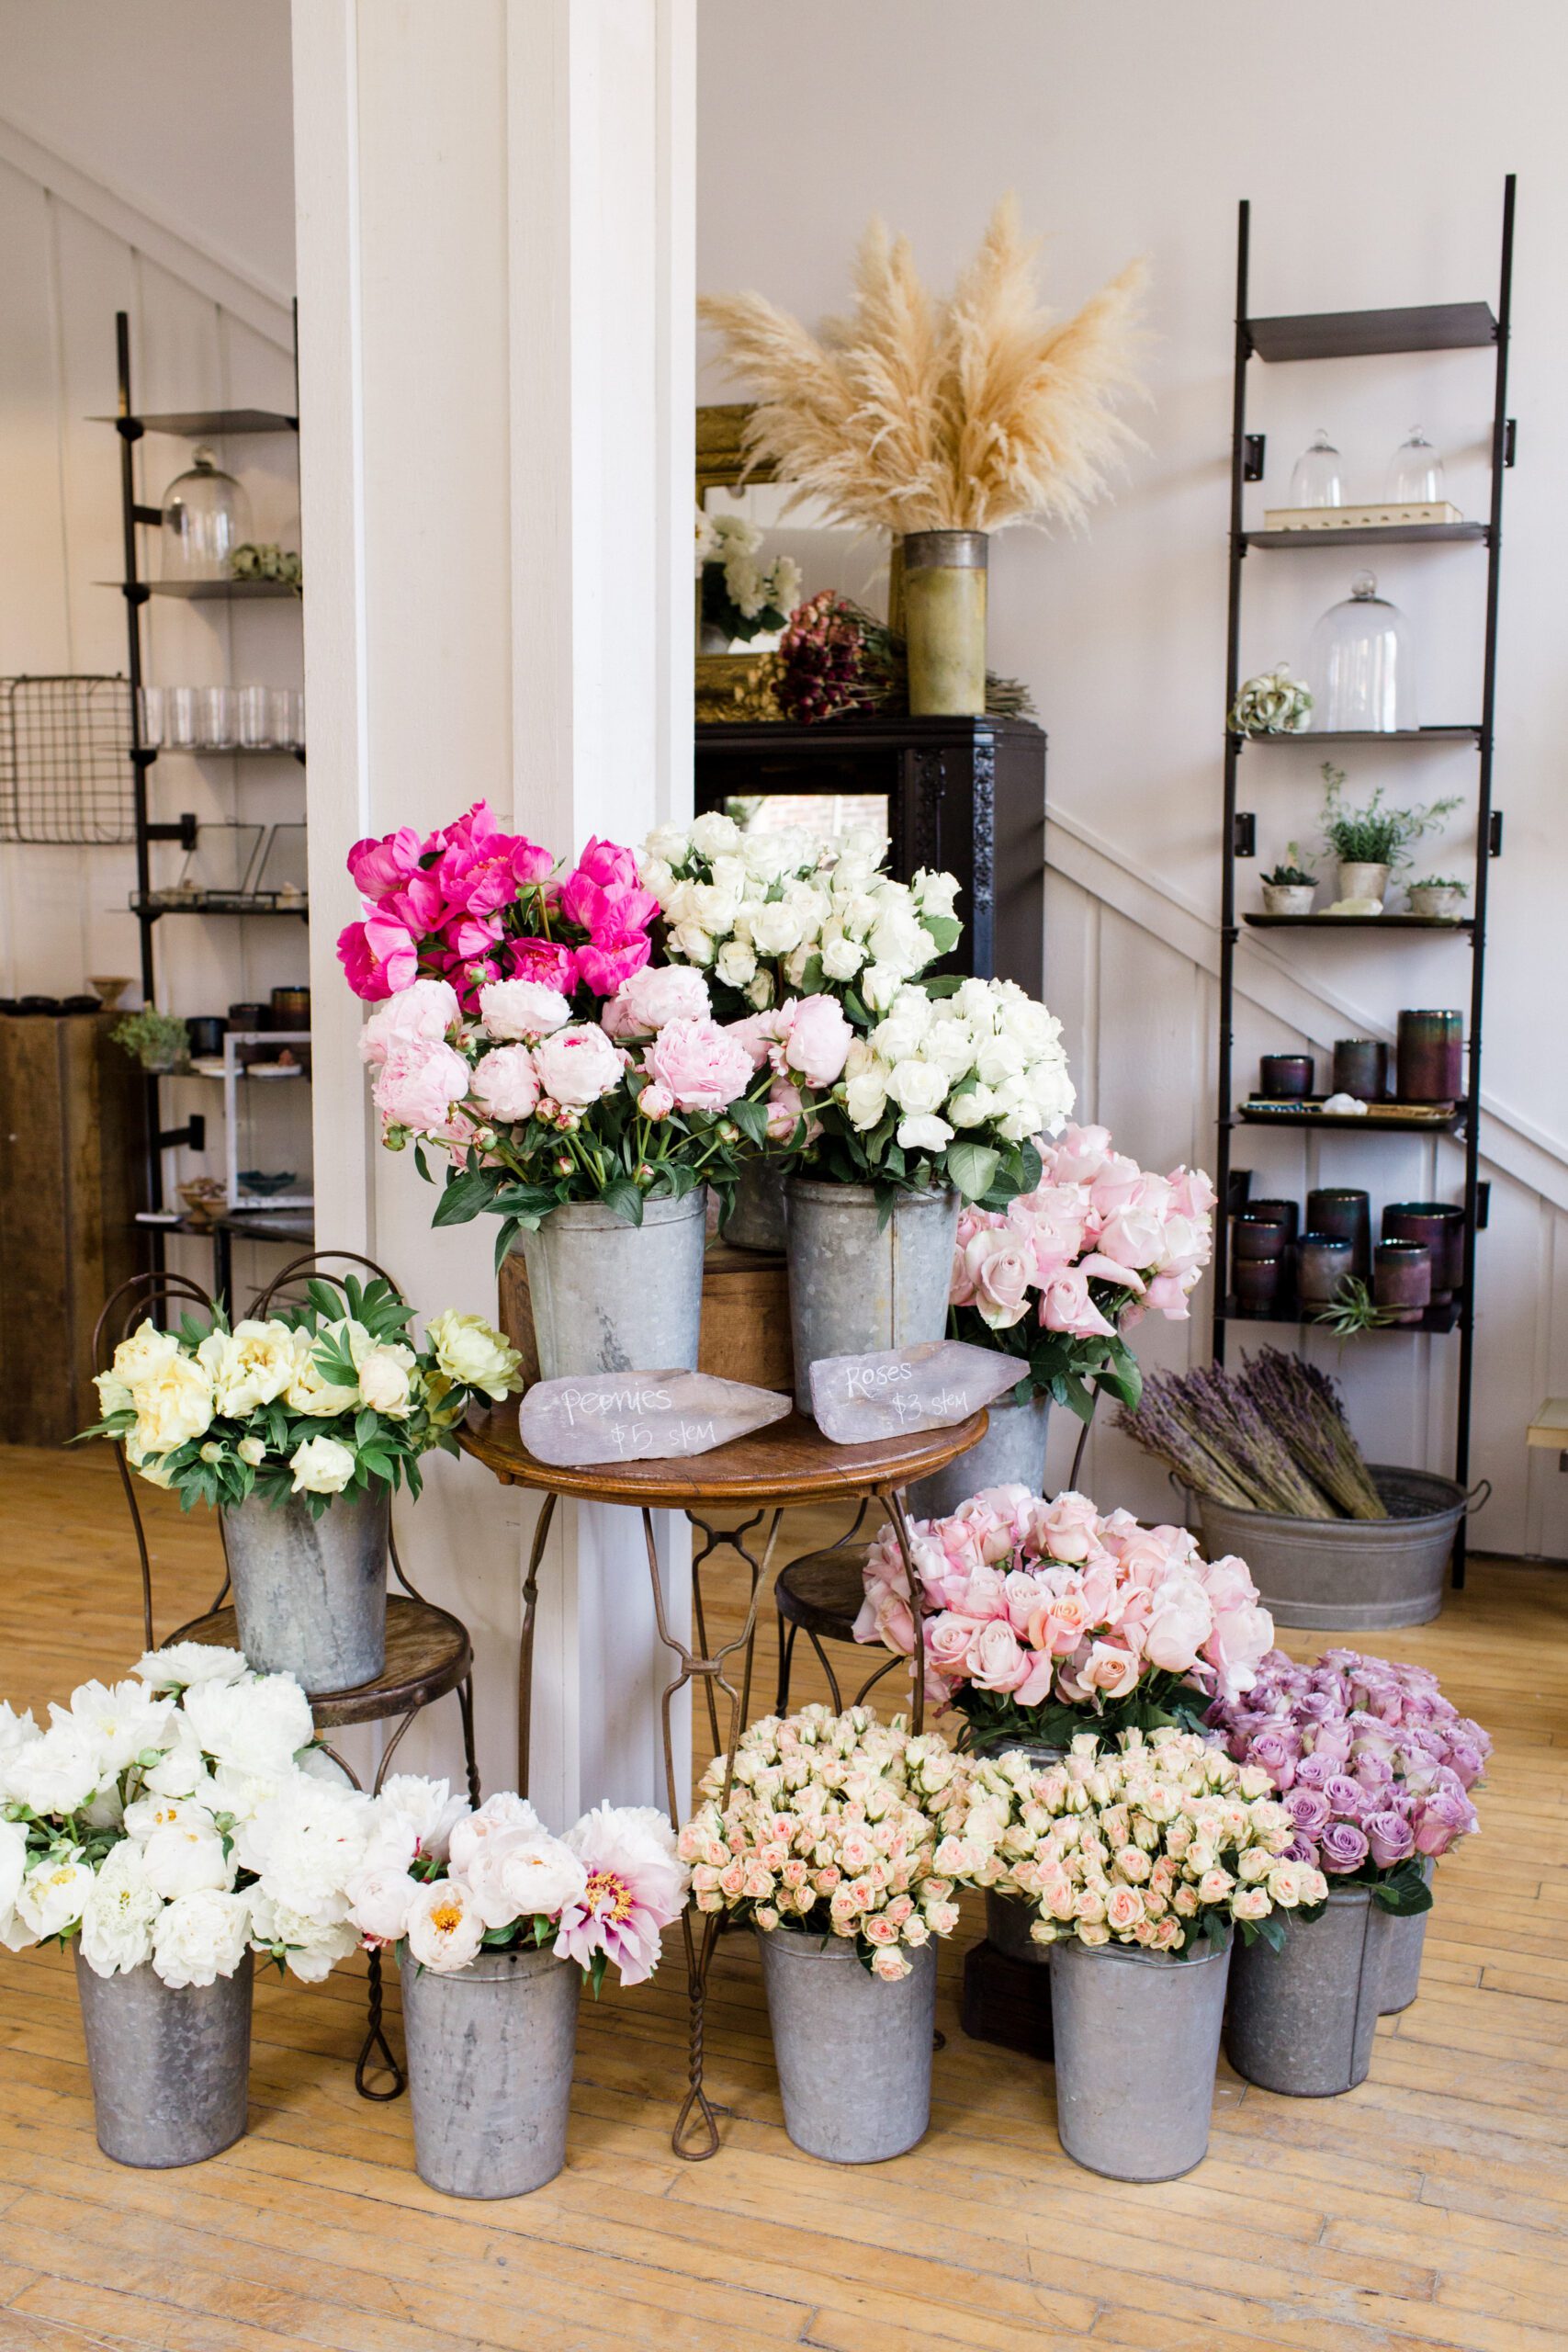 A photograph showing an array of beautiful flowers inside a business for brand photography